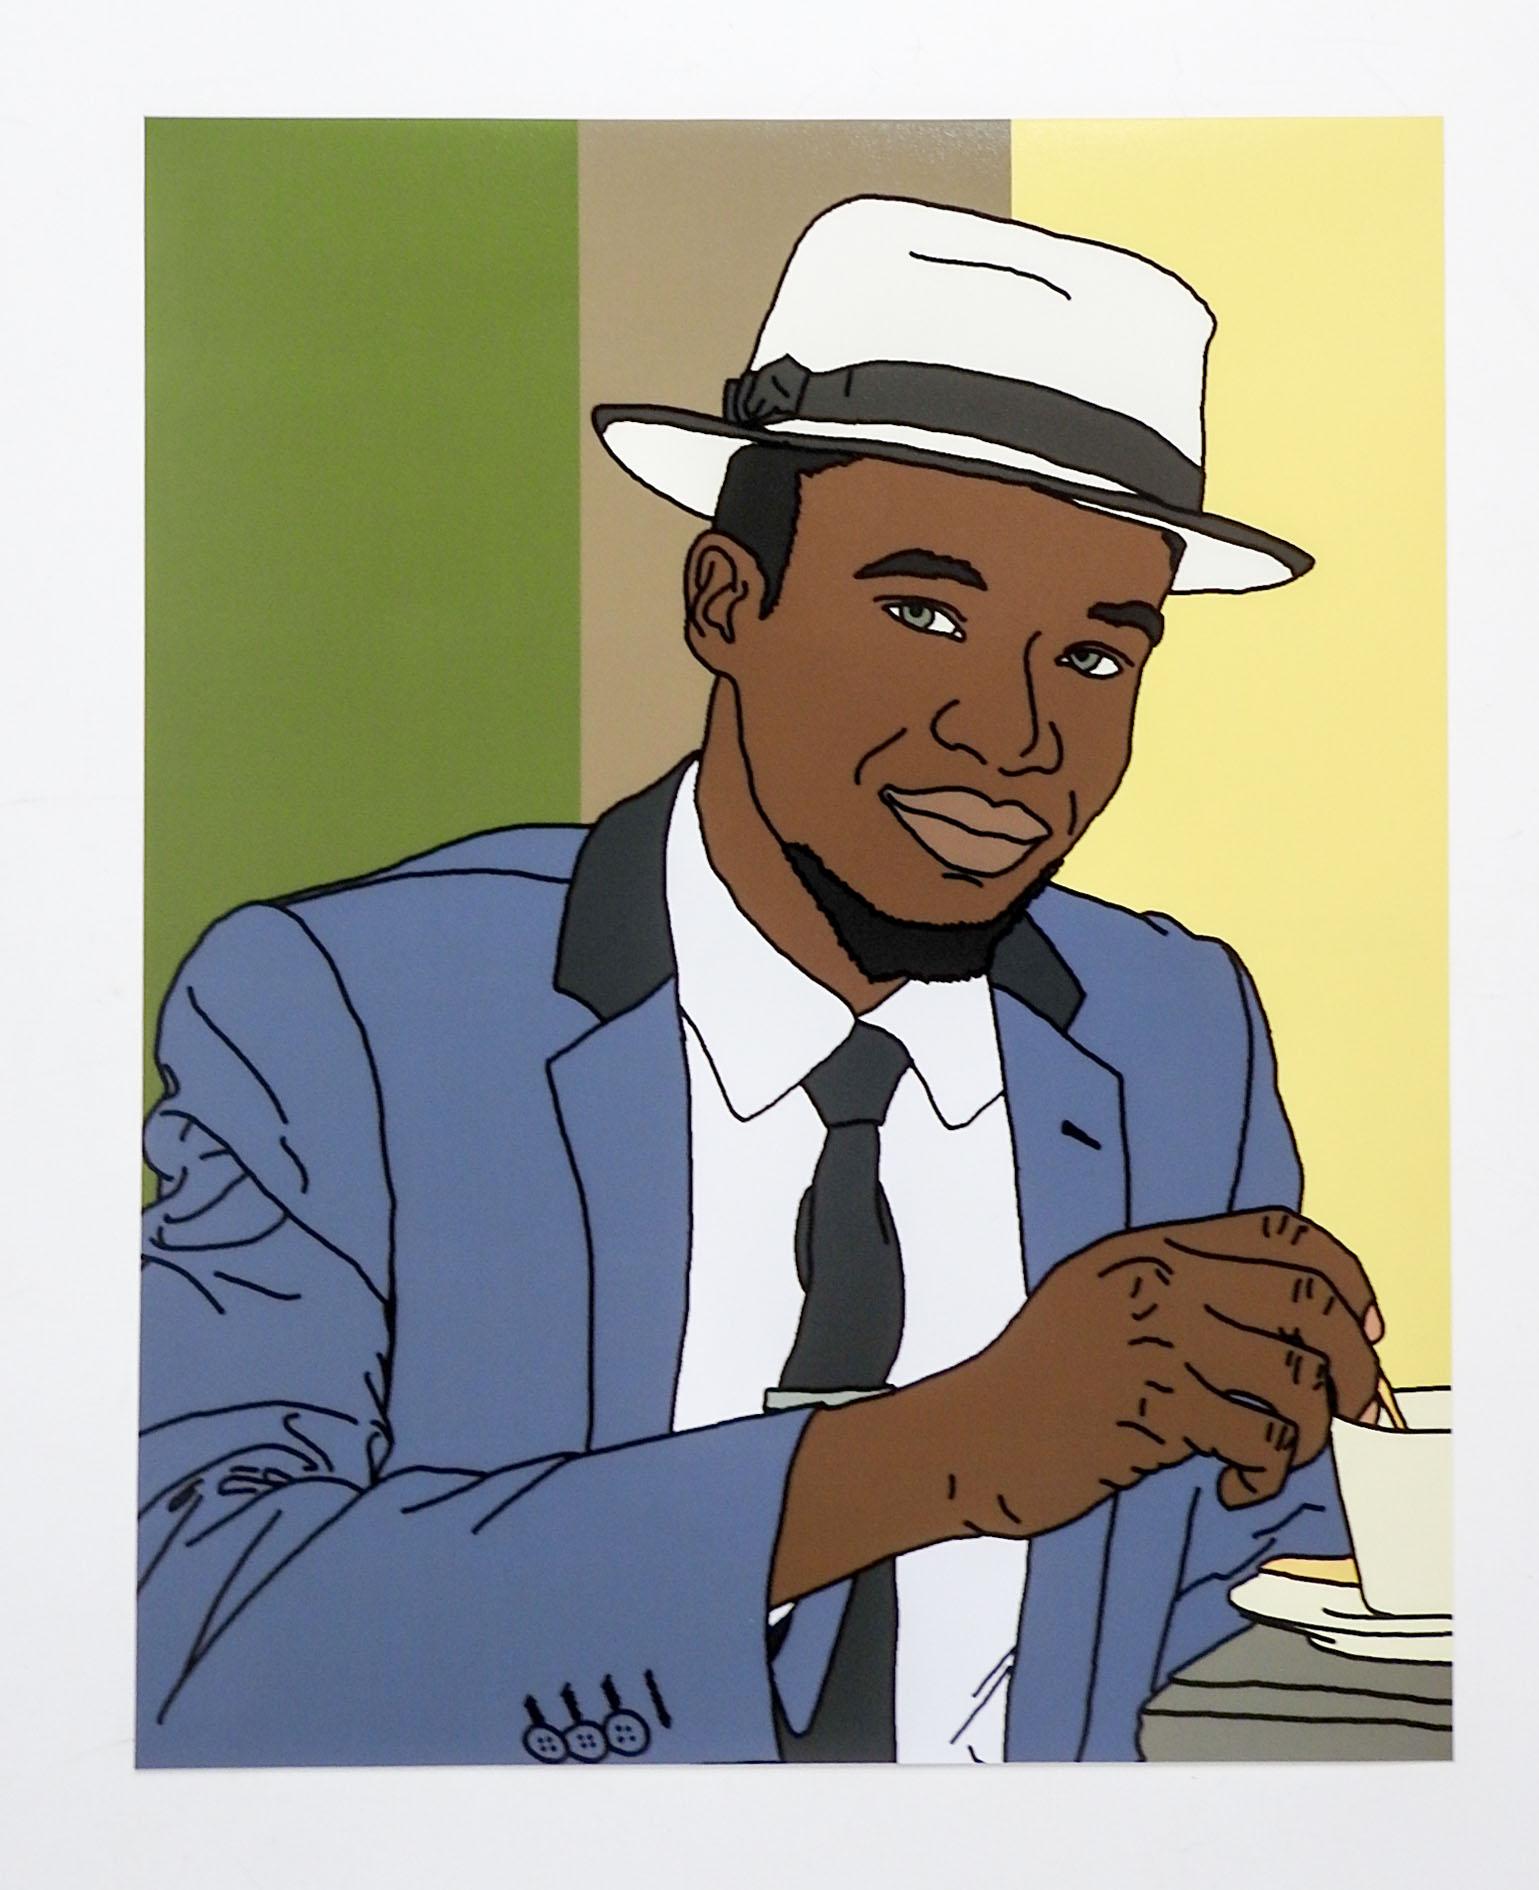 Contemporary 2021 Pop Art giclee print on satin photographic paper paper by David Grinnell (21st century) Texas. Printed artist and titled Blue Suit White Hat on verso. Graphic stylish portrait of African American man with his coffee. Unframed, very